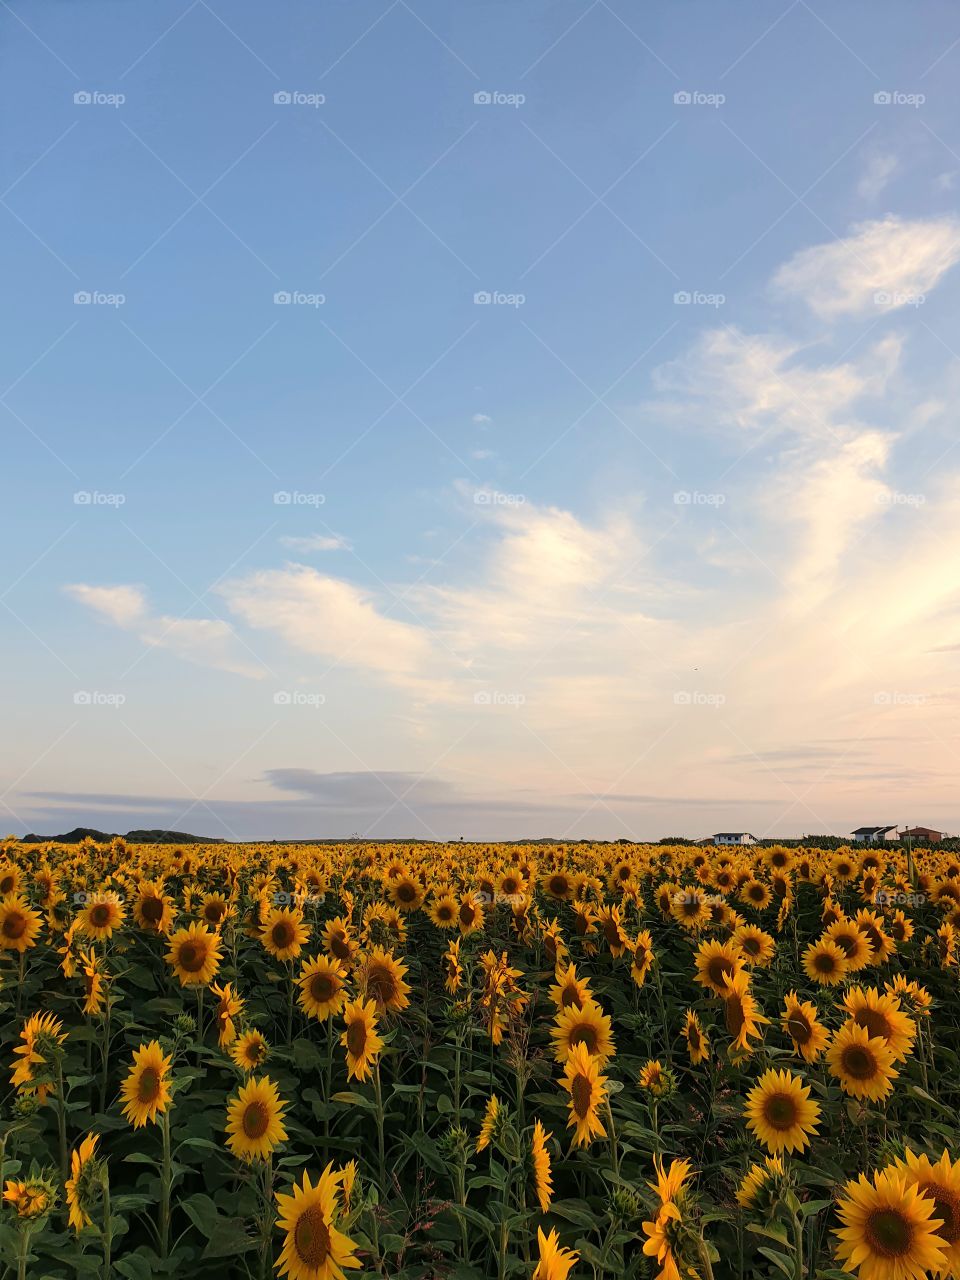 Sunflower Field at the end of the day during summertime